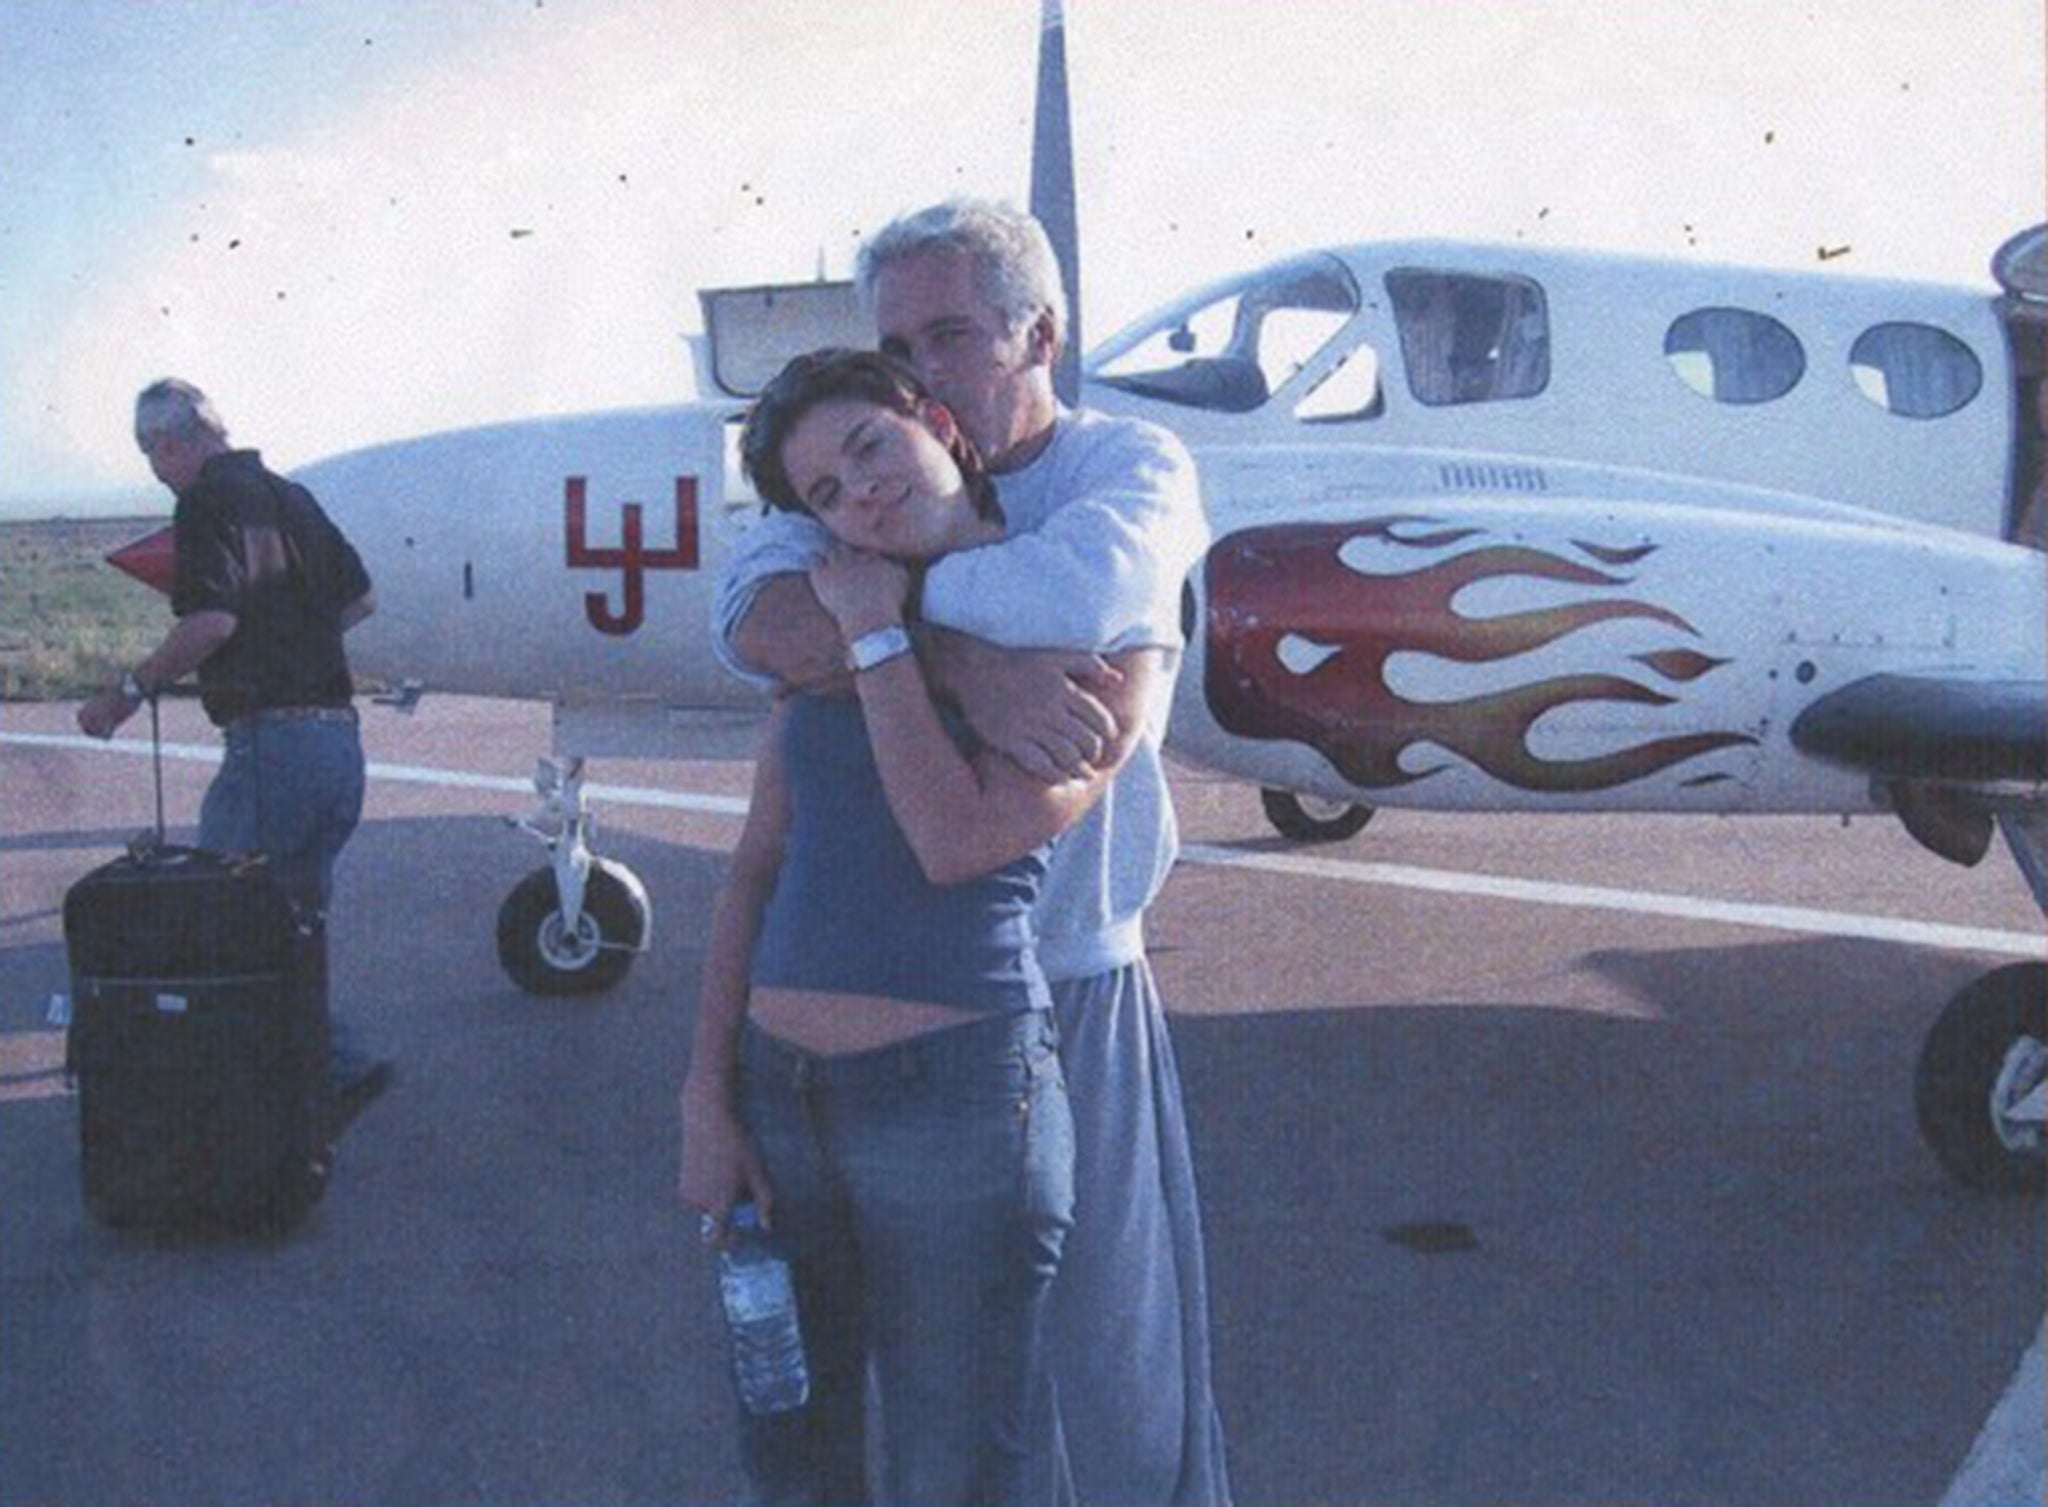 Epstein and his former personal assistant Sarah Kellen